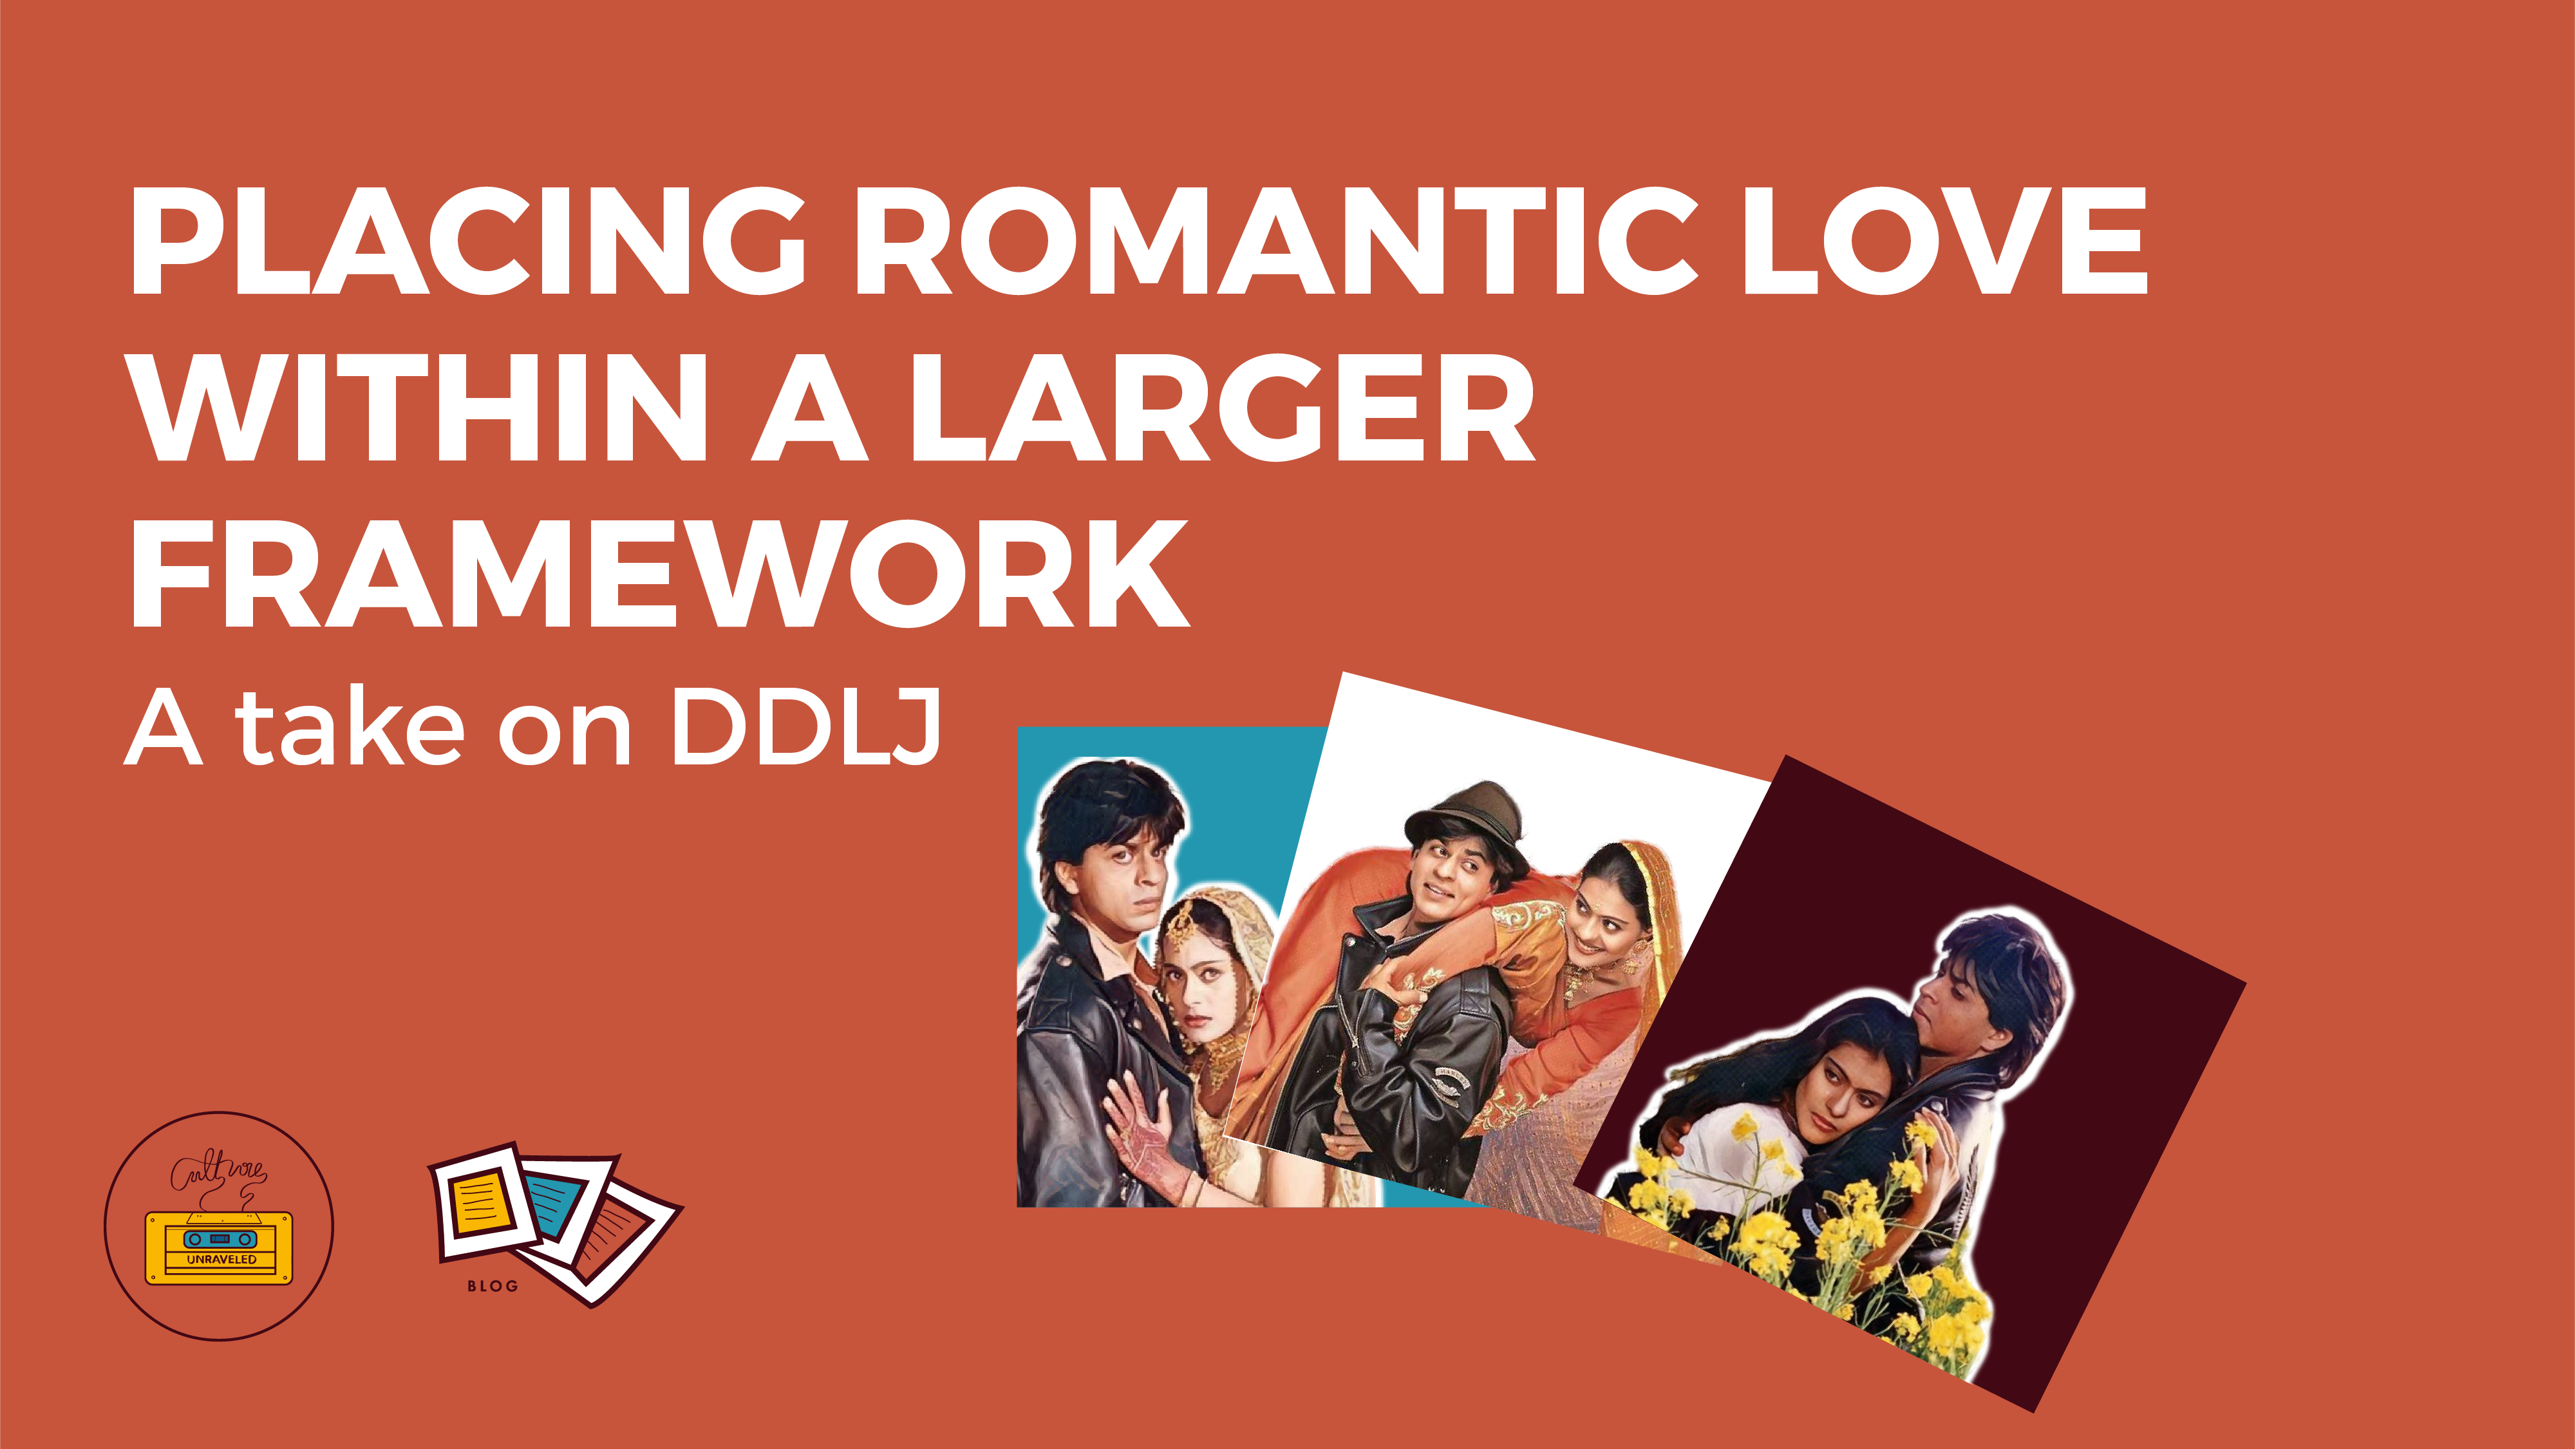 Placing Romantic Love within a Larger Framework – A Take on DDLJ